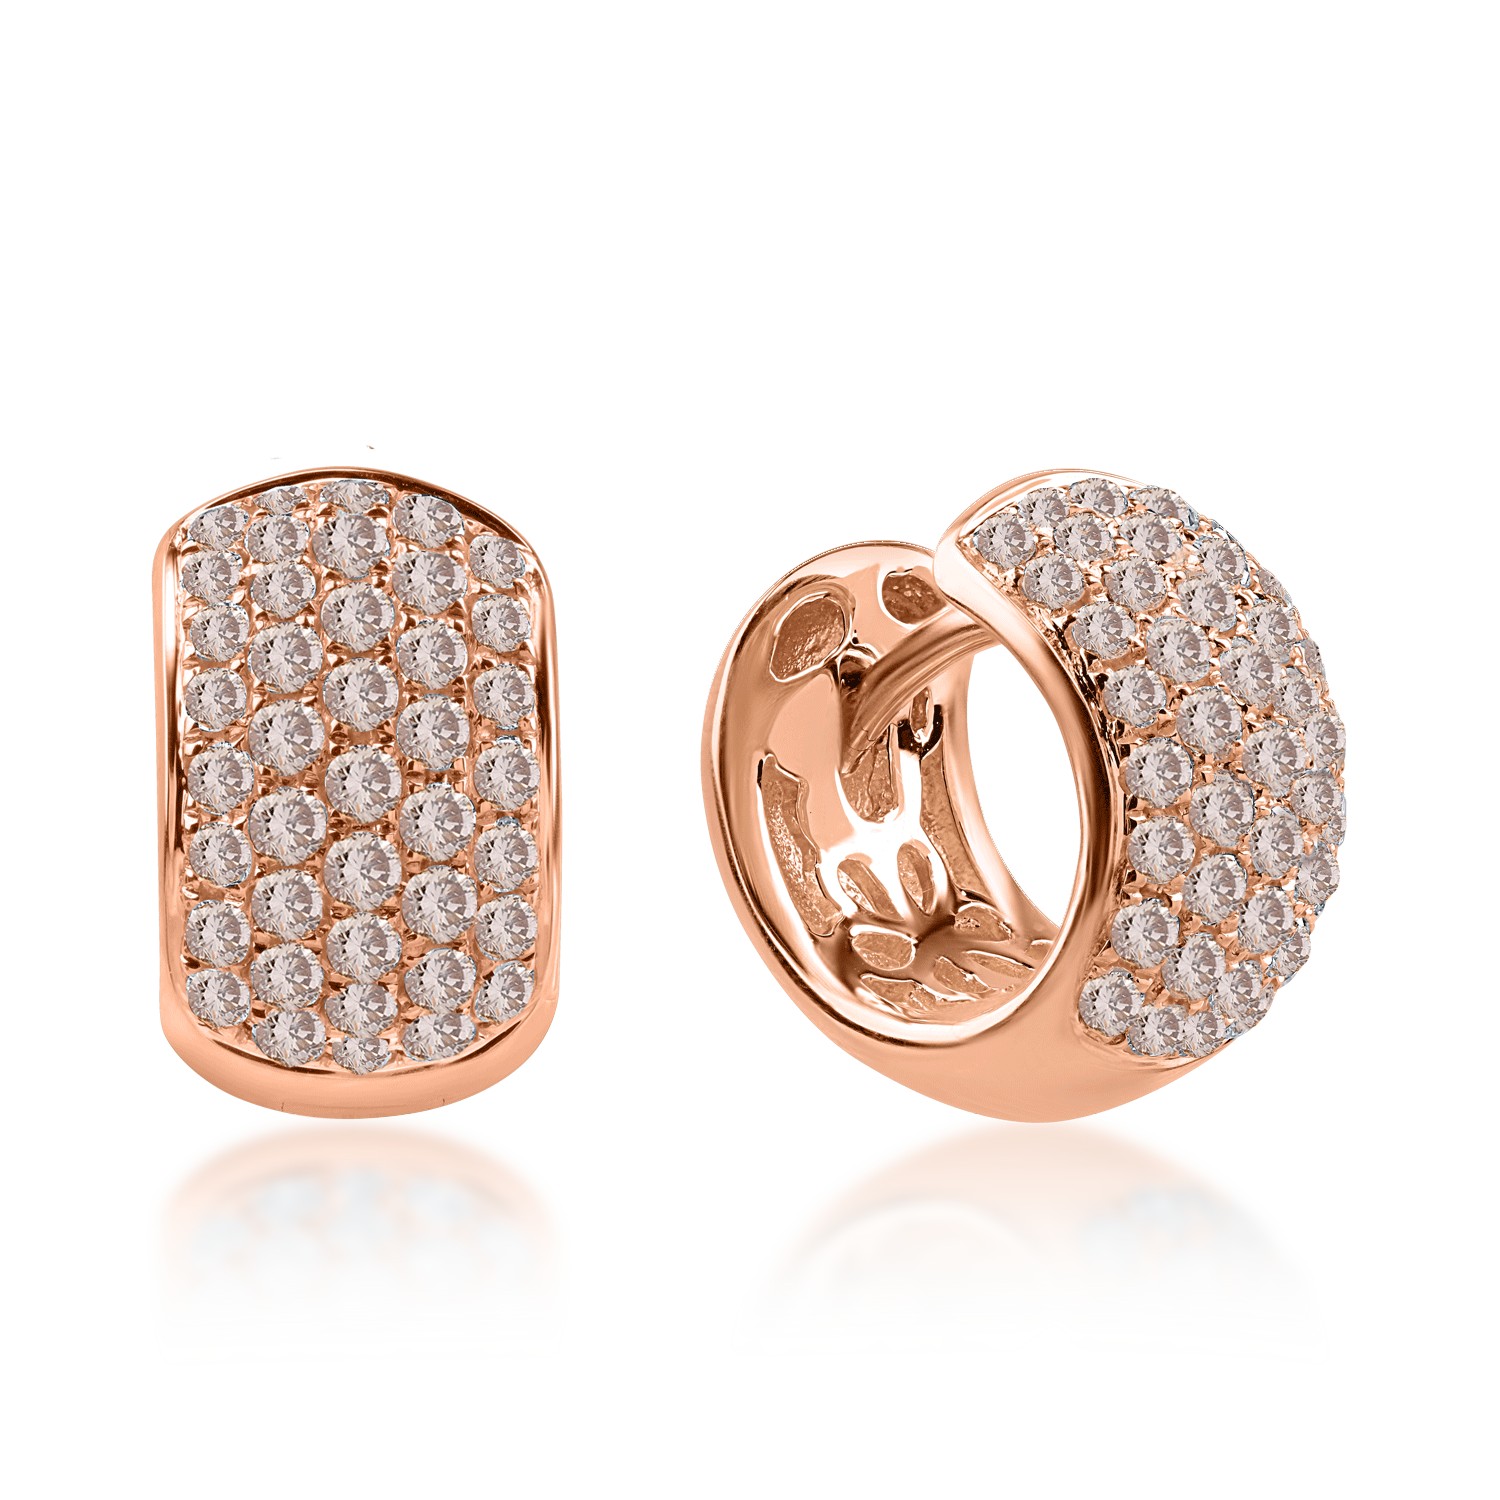 Rose gold earrings with 0.74ct brown diamonds